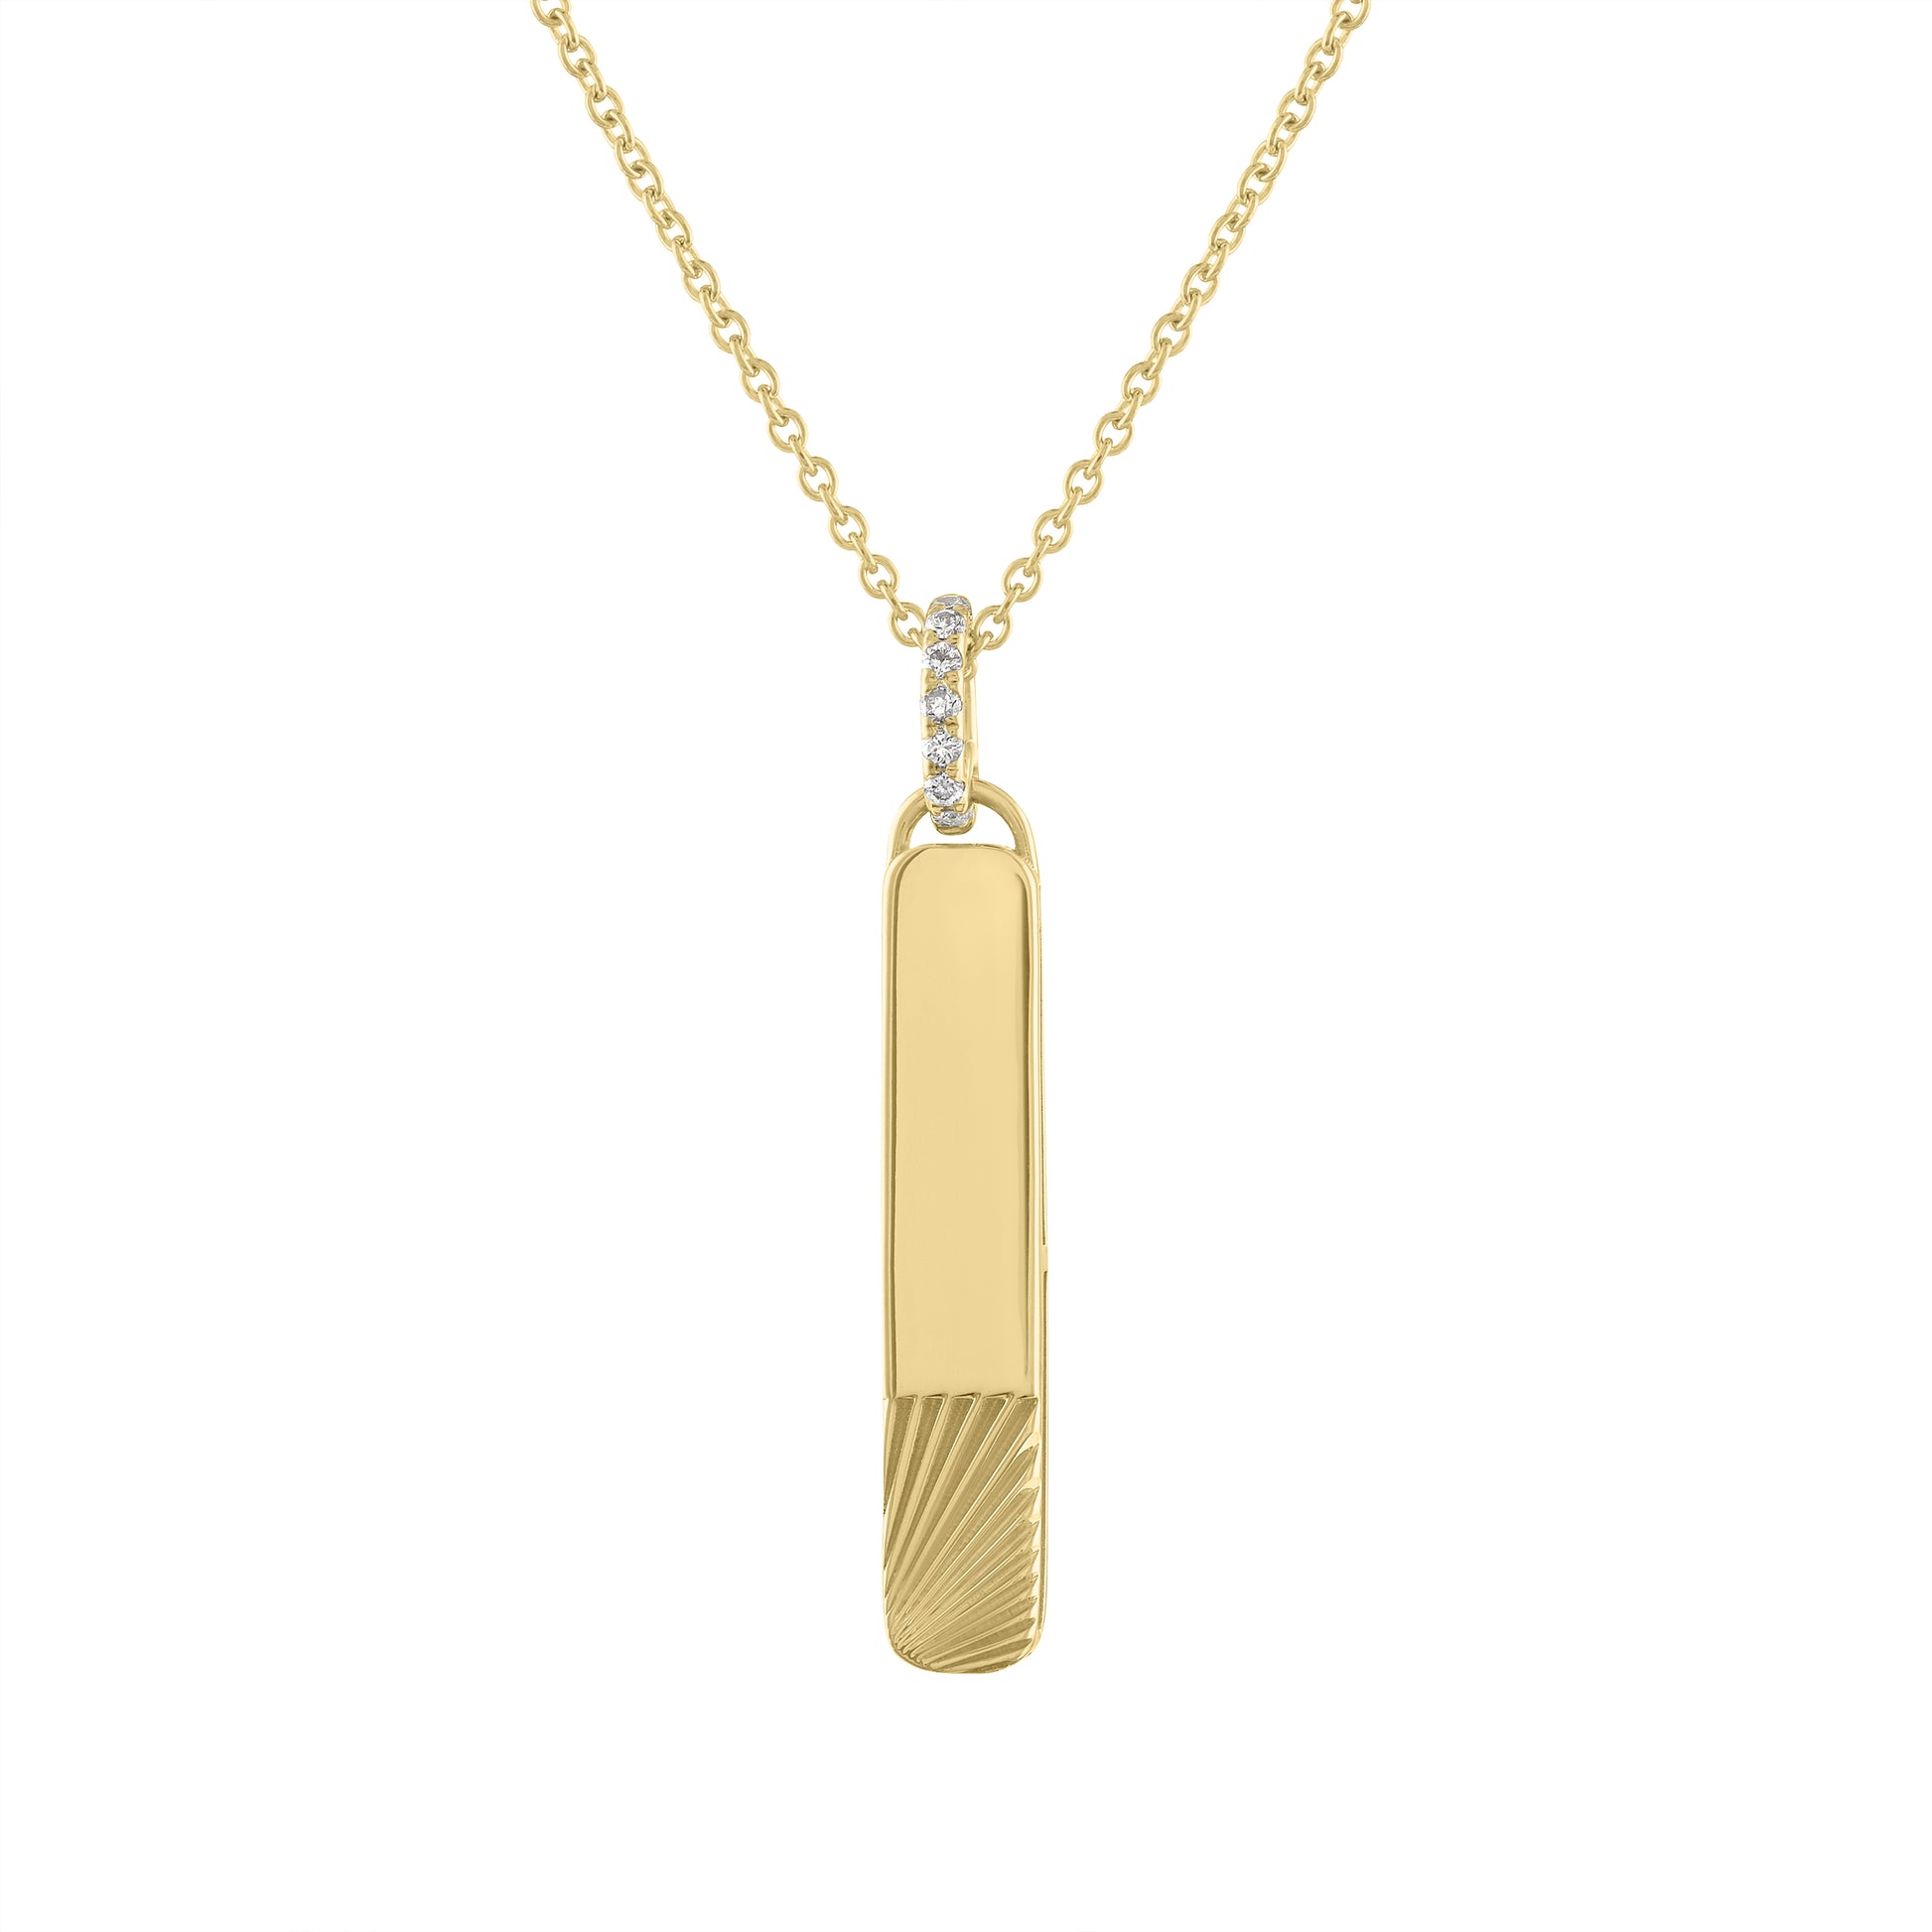 Yellow gold small skinny engravable dogtag with fluting and a diamond bail.